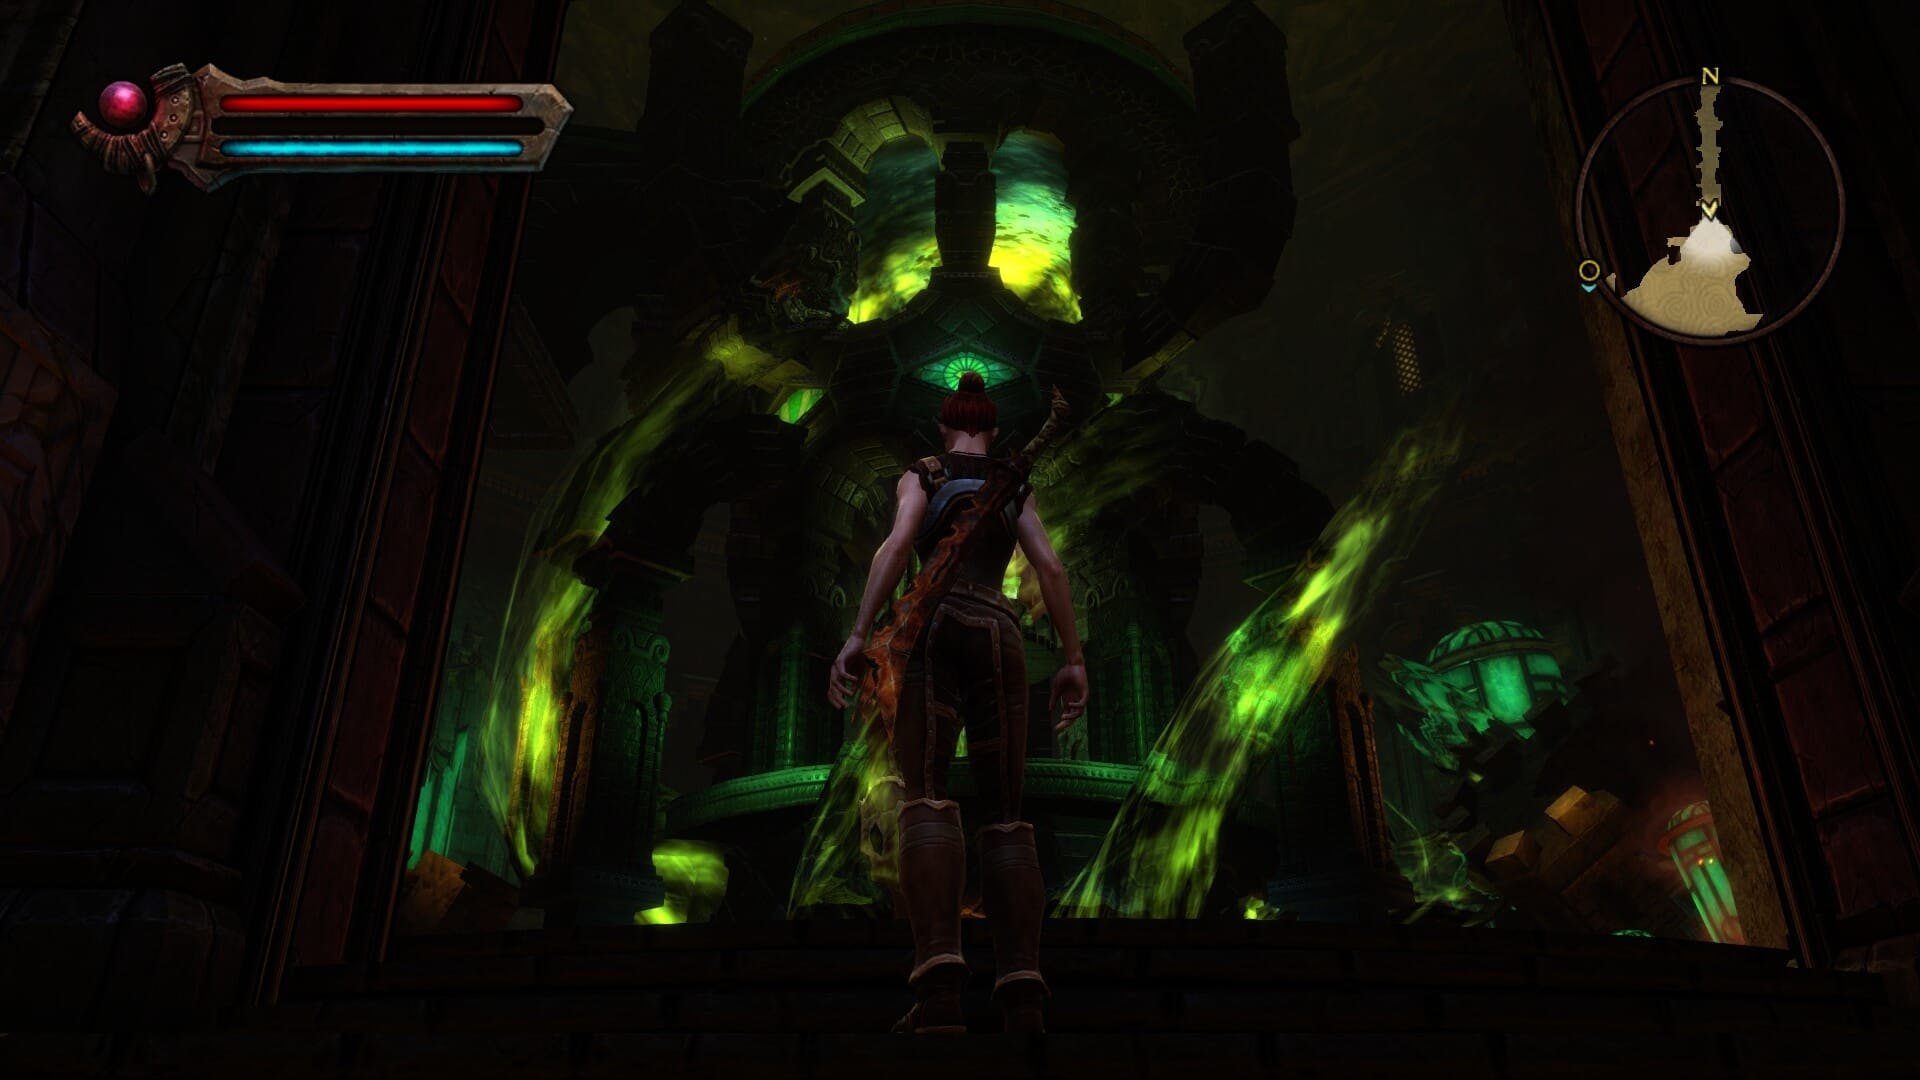 A character can be seen walking with a large structure in front of them in a dark room